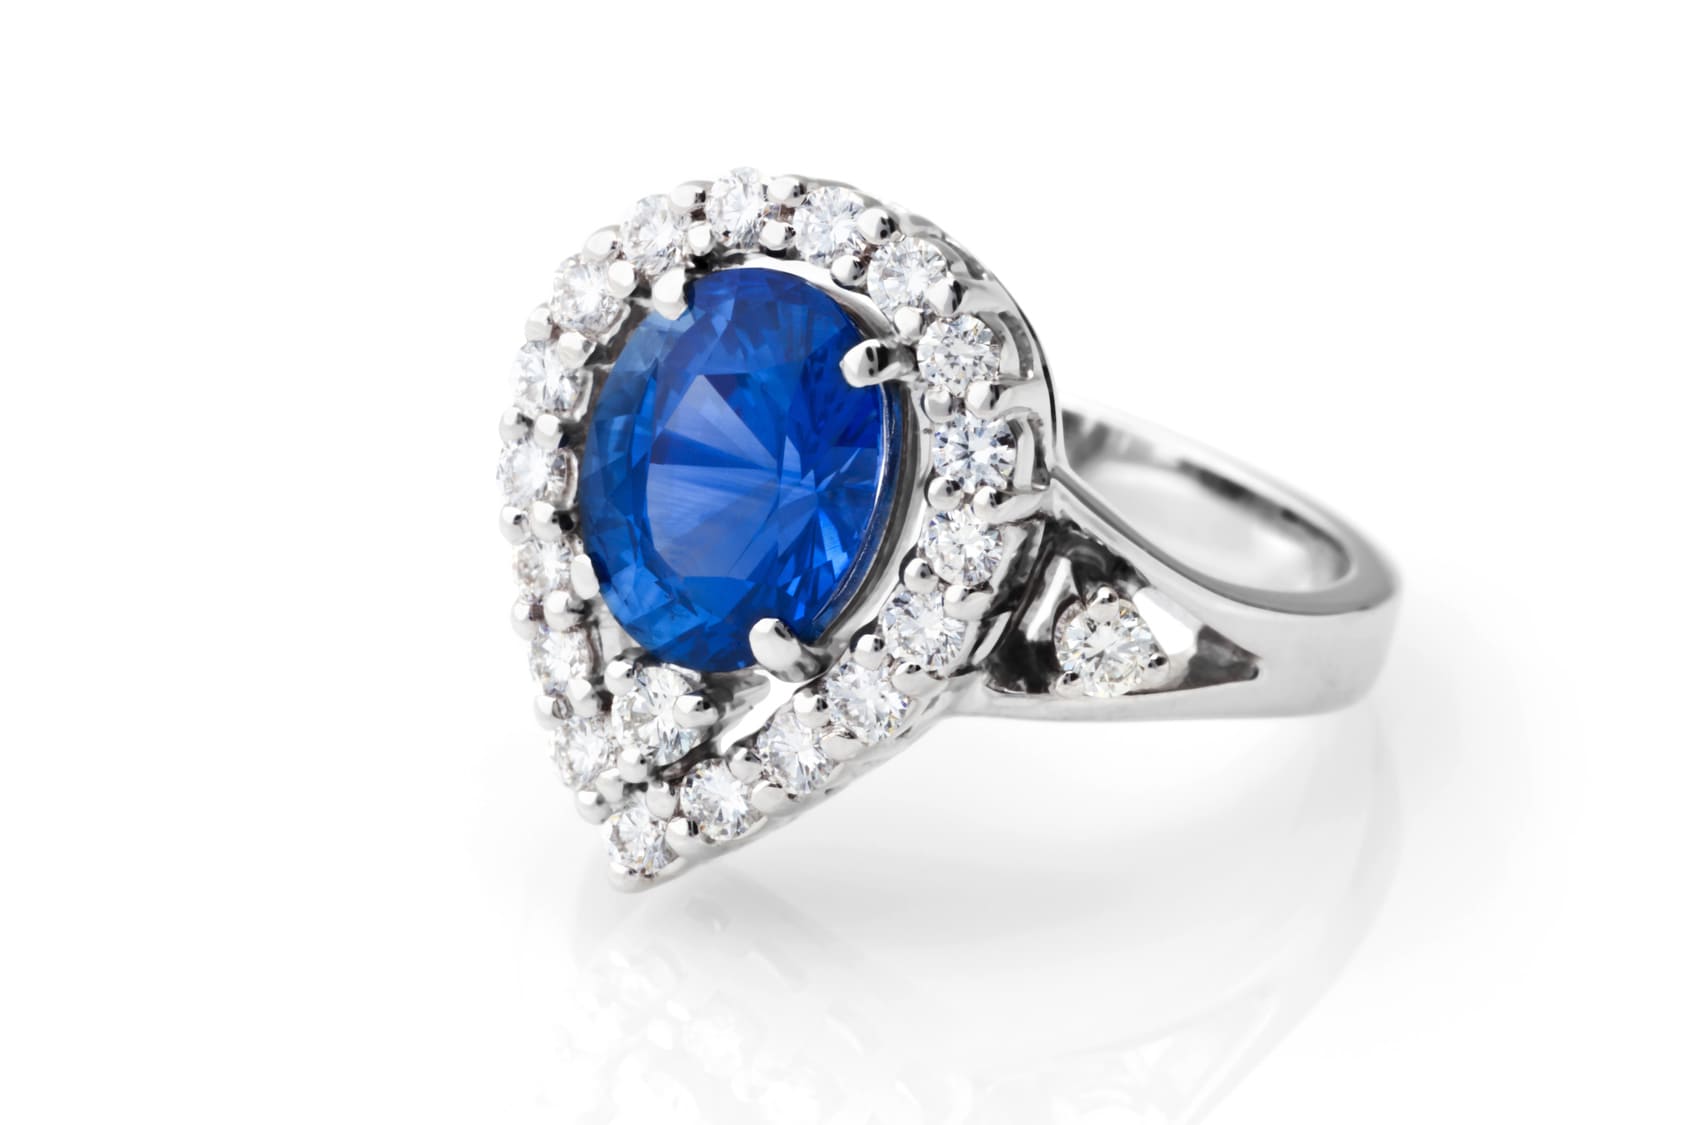 A ring with sapphire and diamonds.